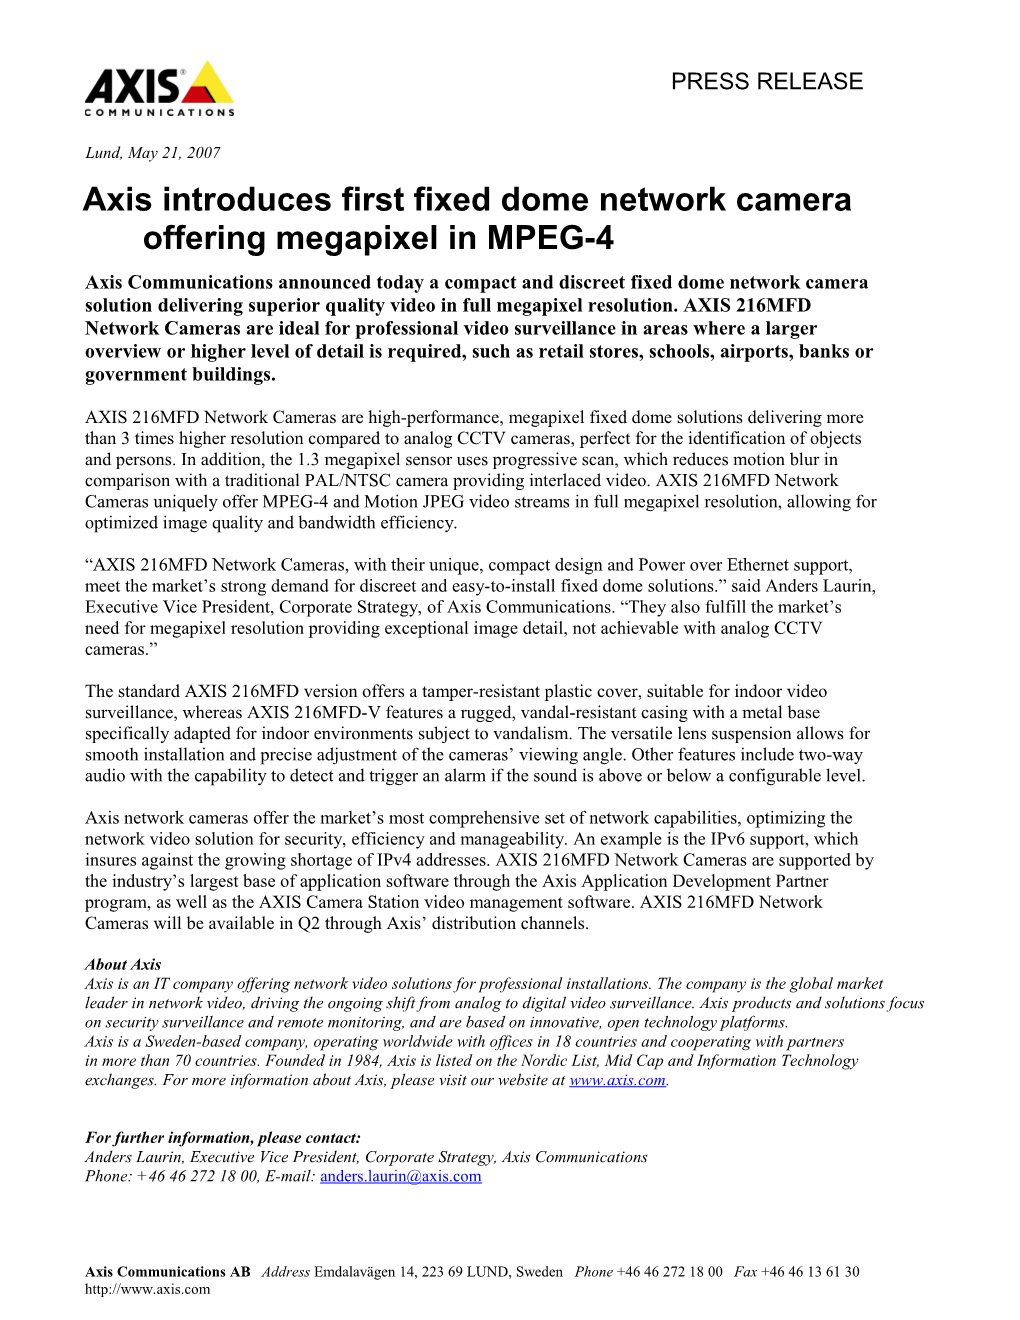 Axis Communications Announced Today a Compact and Discreet Fixed Dome Network Camera Solution